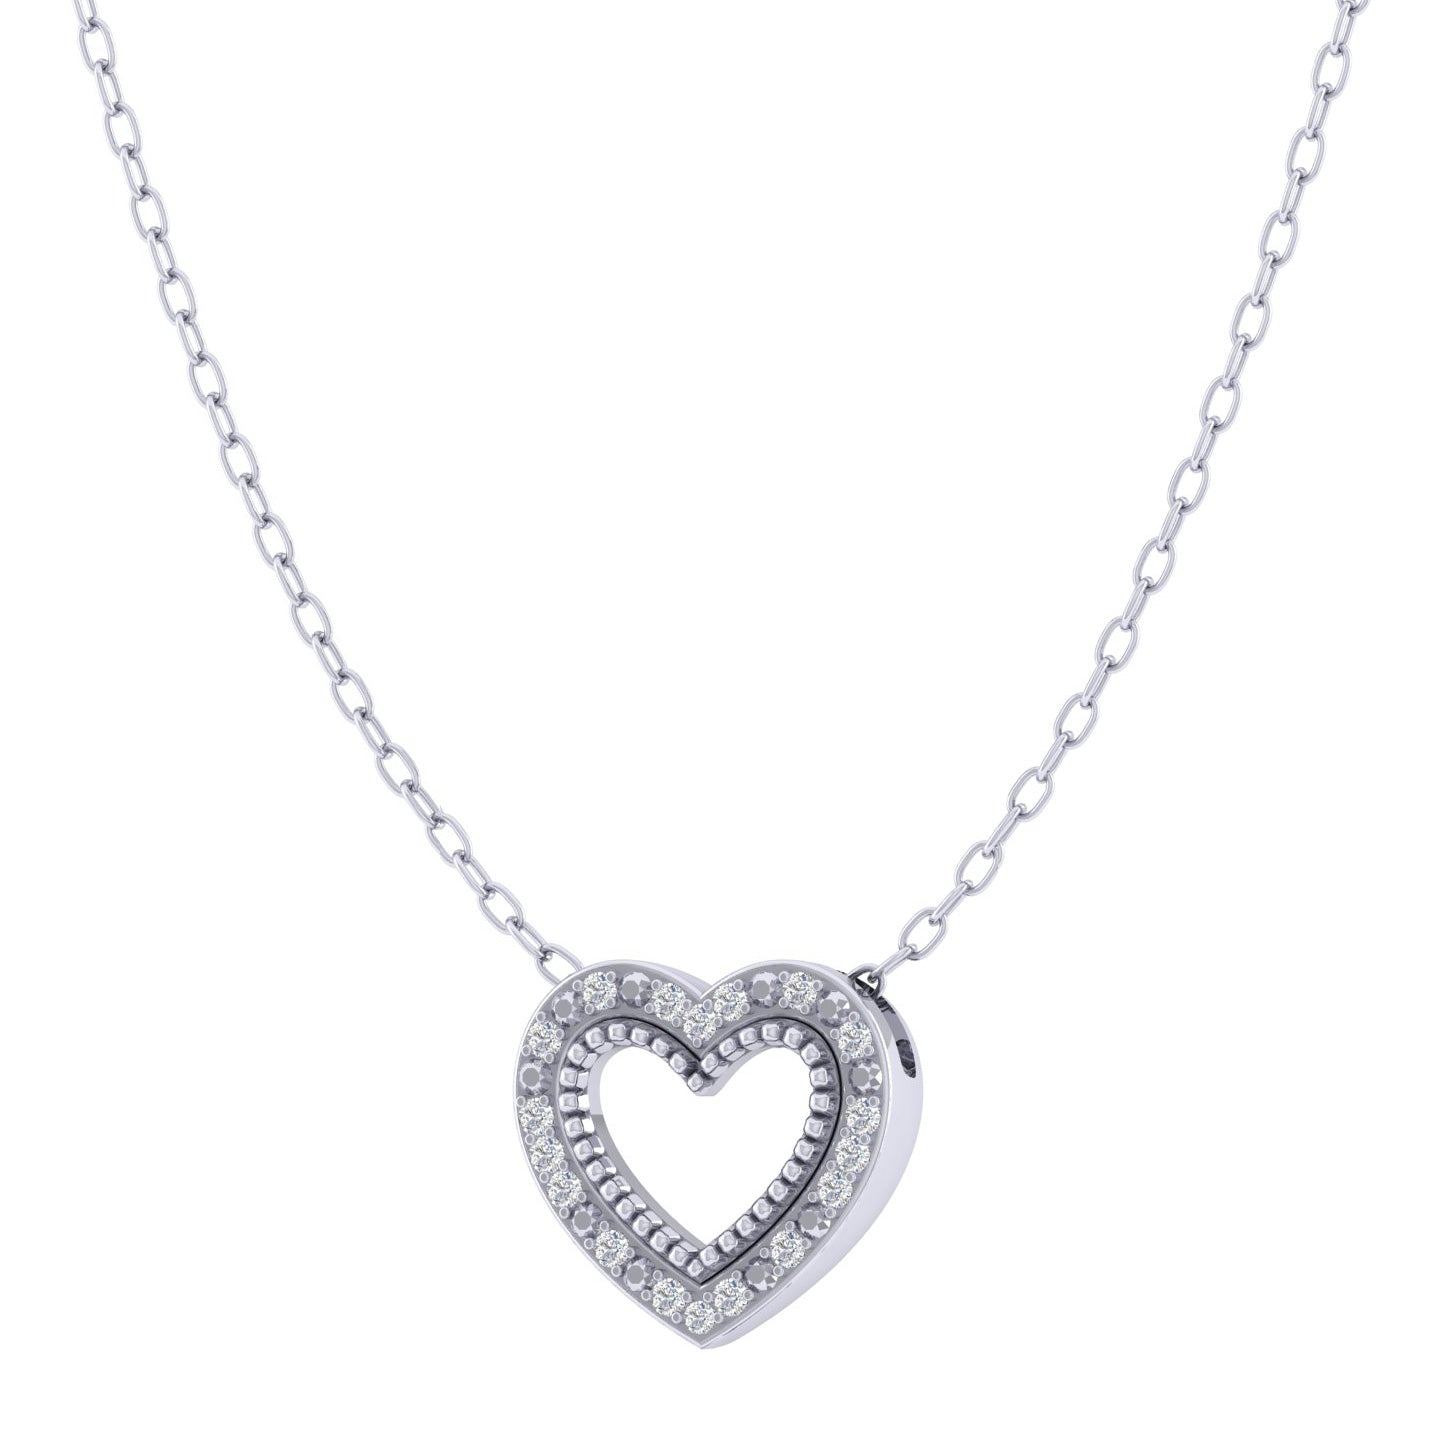 Heart 1/20 Cttw Natural Diamond Pendant Necklace set in 925 Sterling Silver